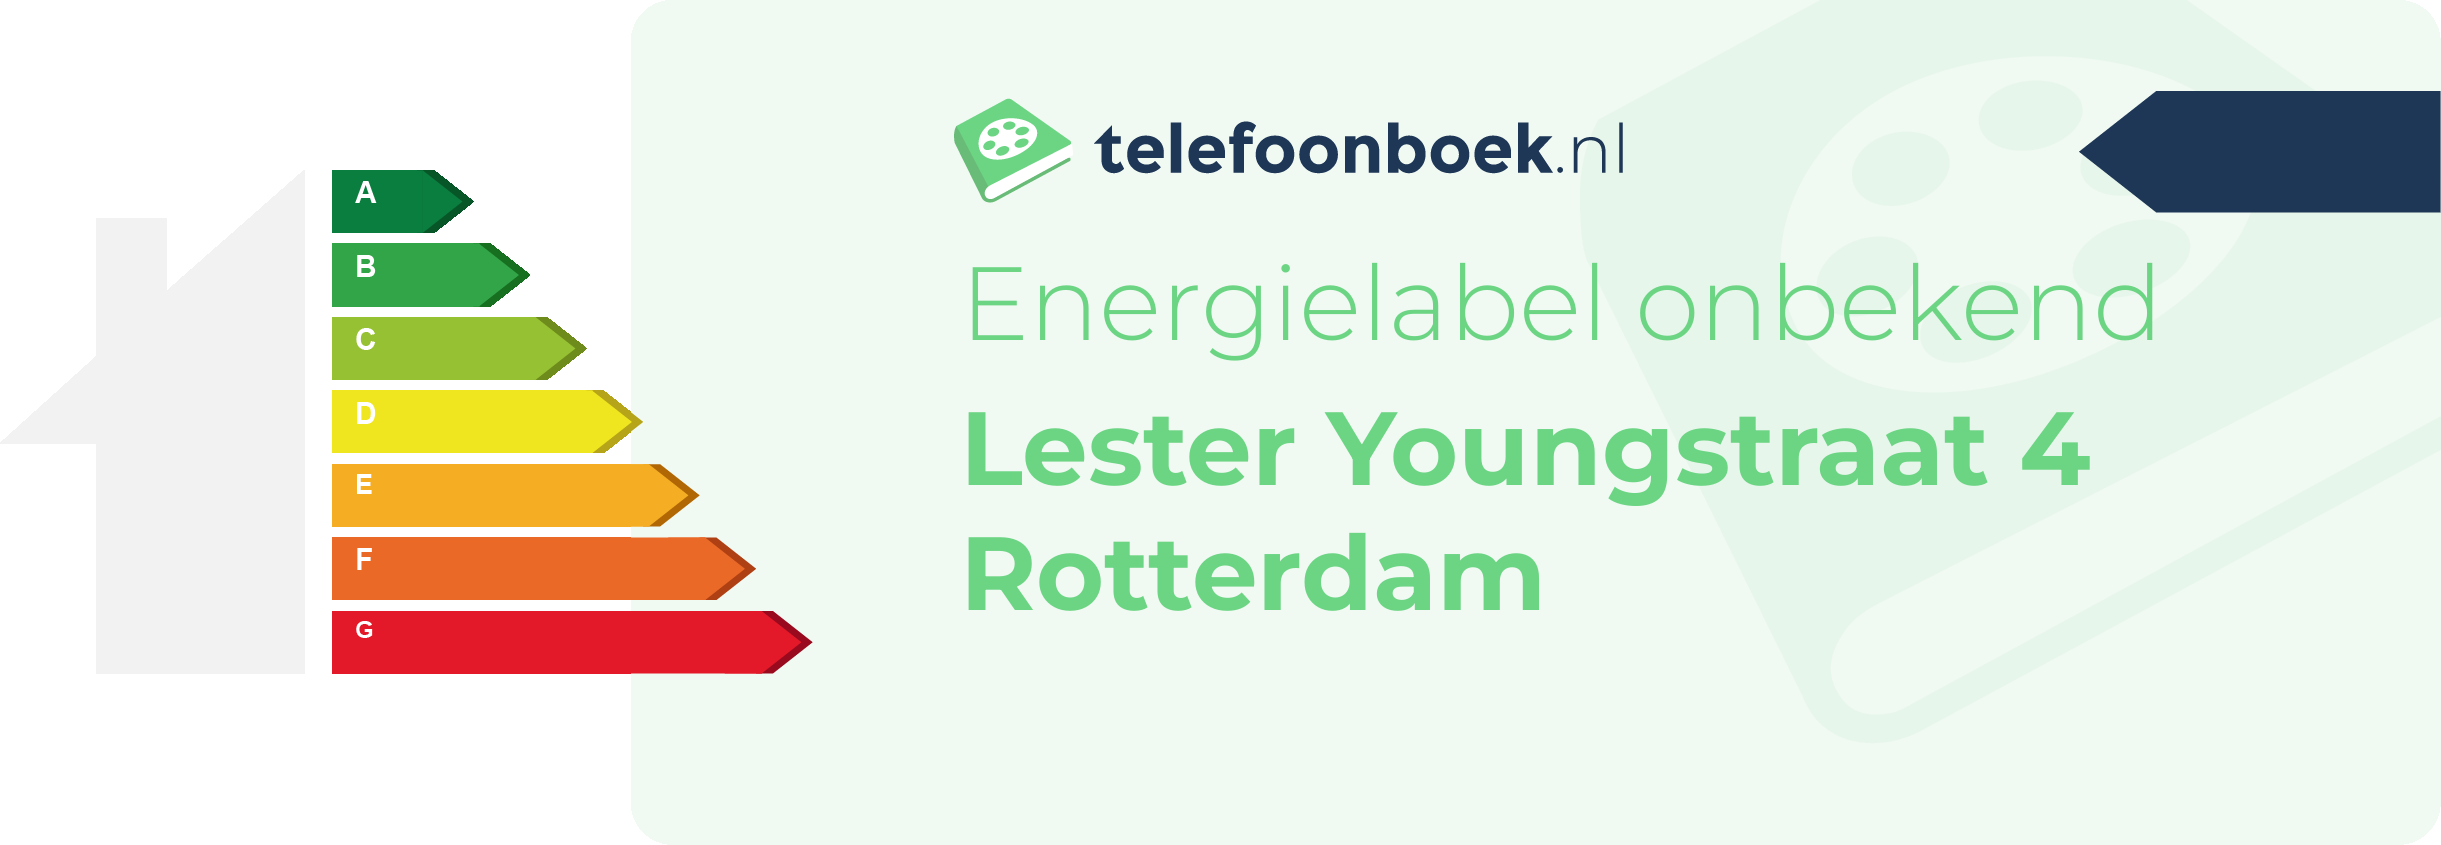 Energielabel Lester Youngstraat 4 Rotterdam